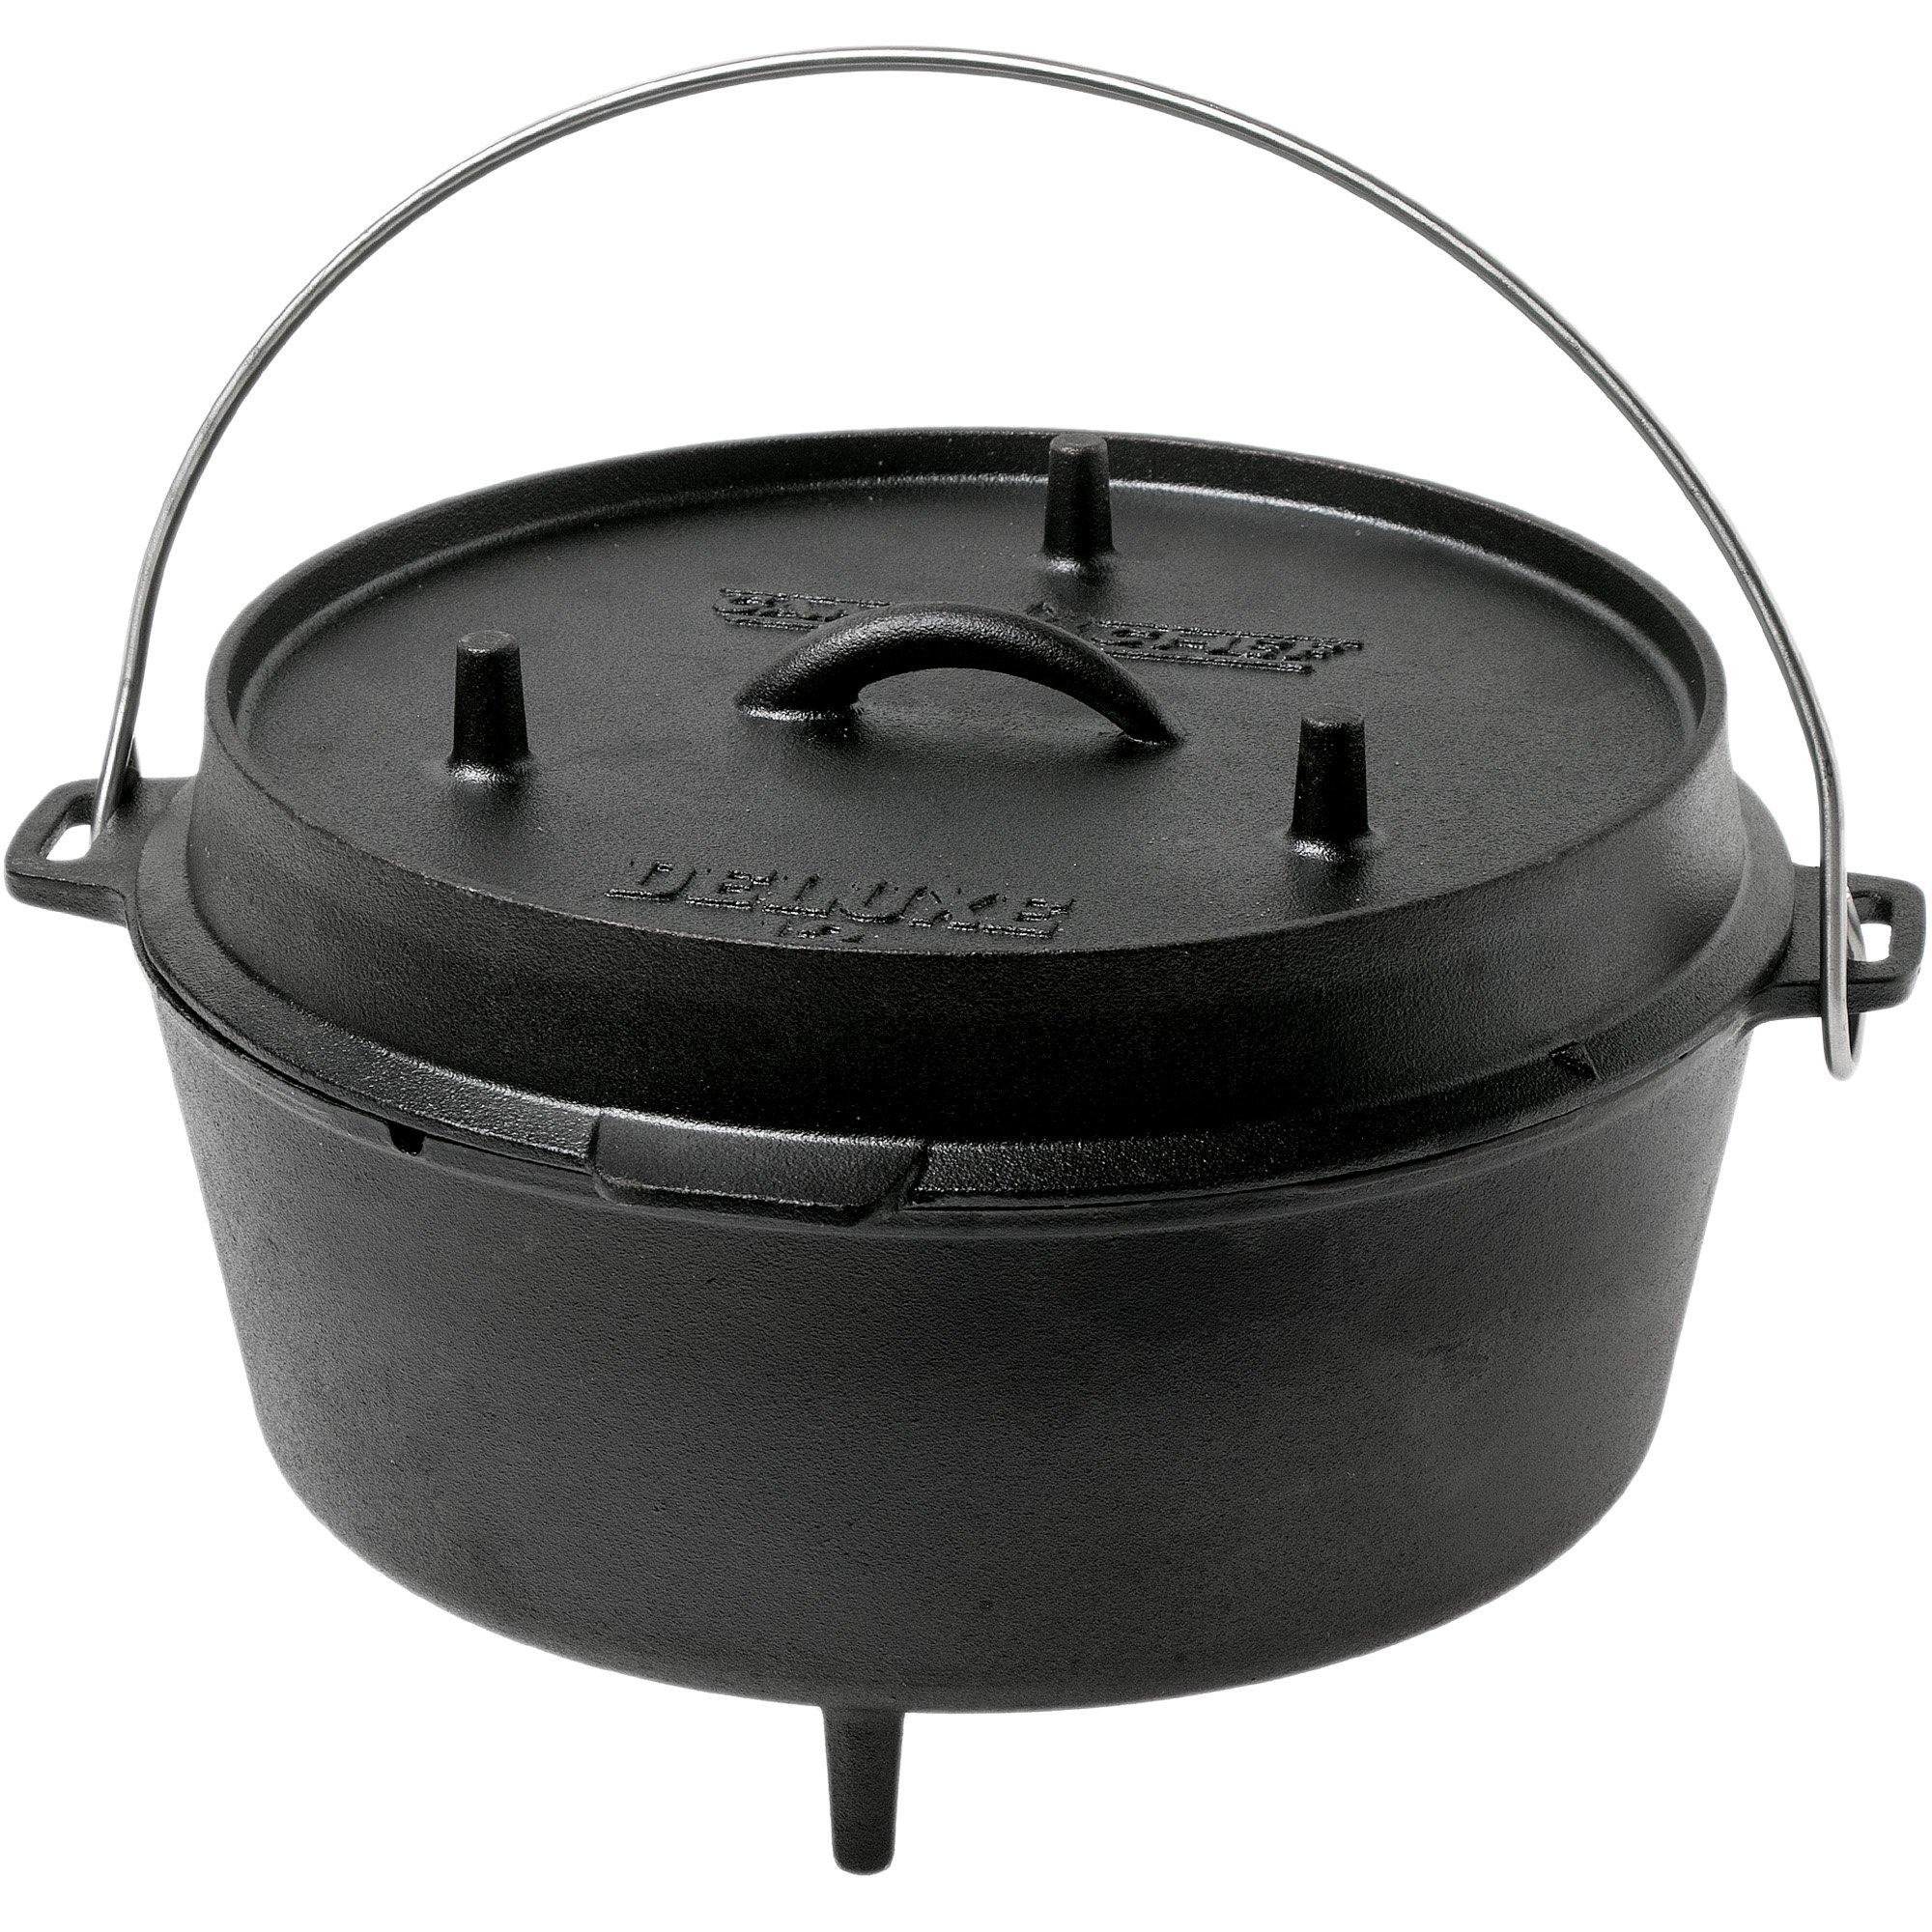 Lodge Dutch Oven with spiral handle L12DO3, contents approx. 8.5 L